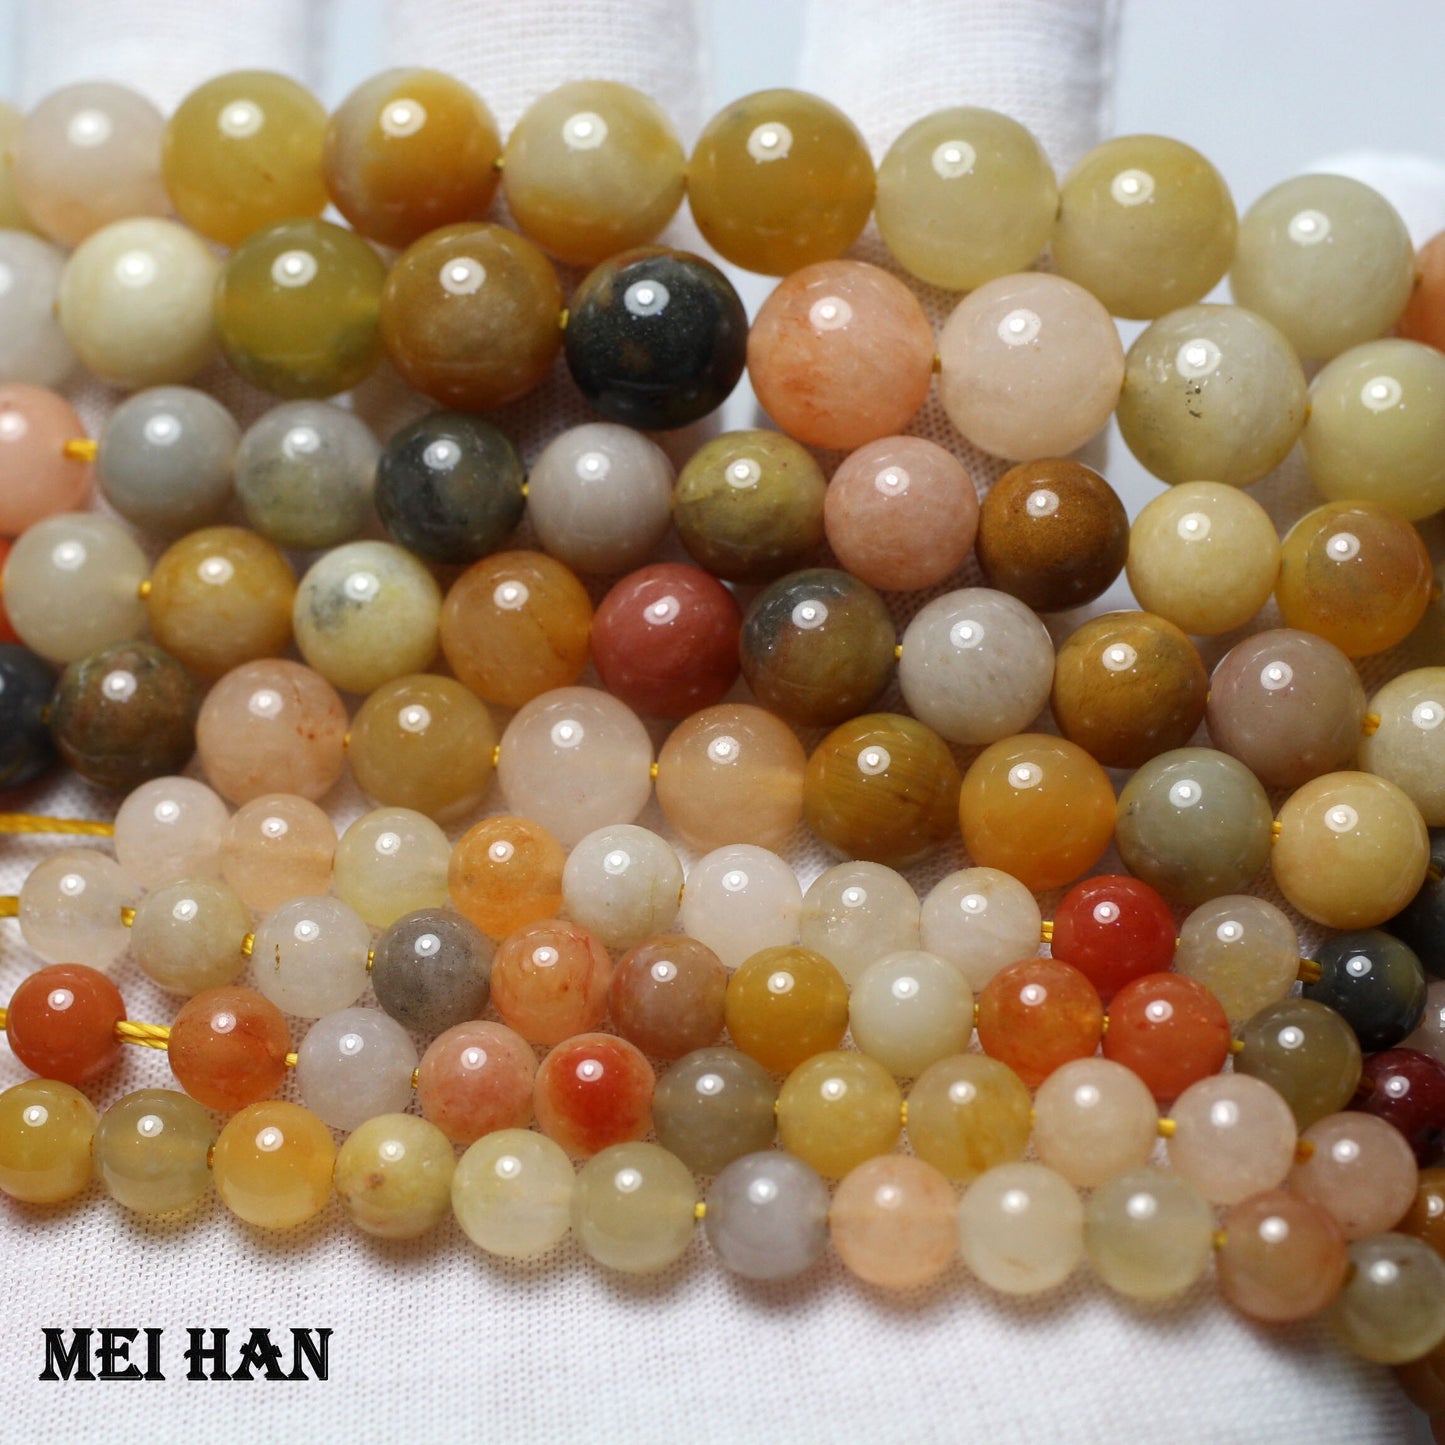 Natural colorful jade smooth stones beads